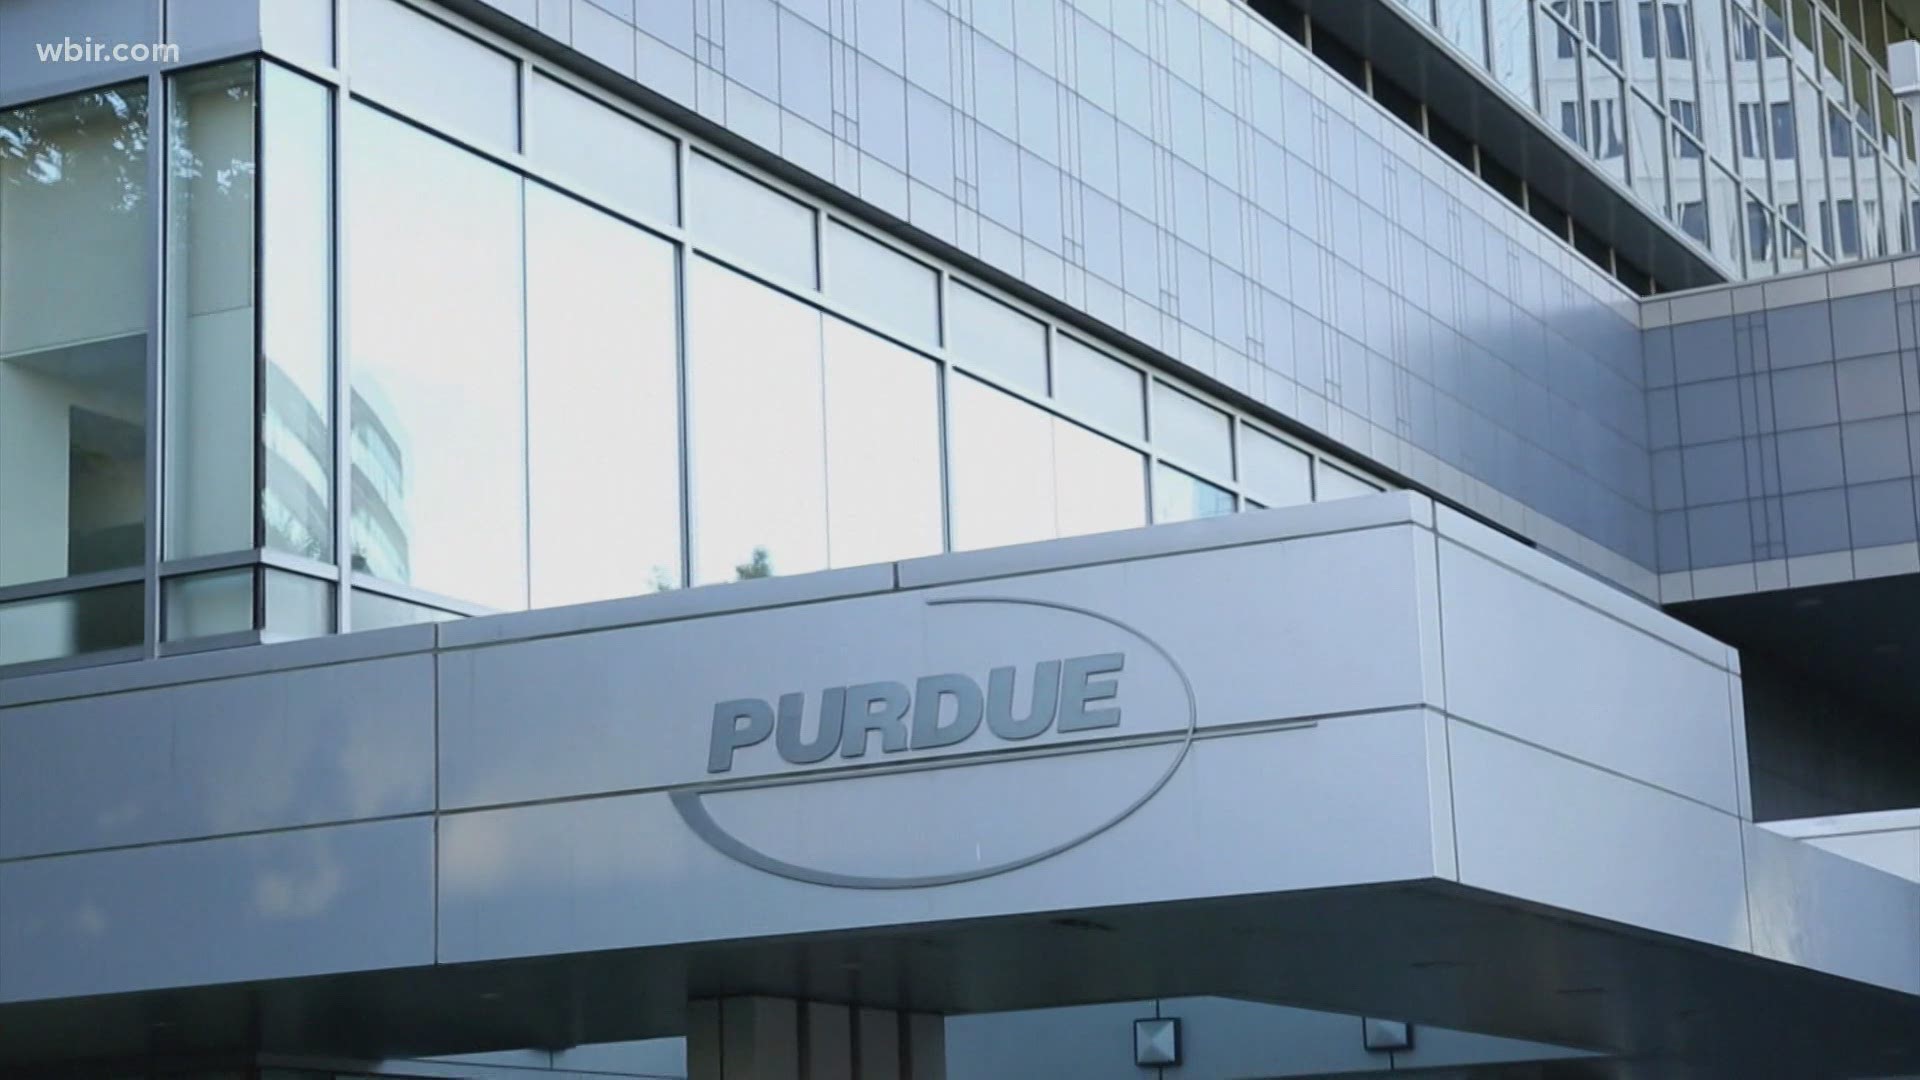 People and communities decimated by the opioid crisis are set to receive more than $10 billion in a bankruptcy settlement plan Purdue Pharma filed.